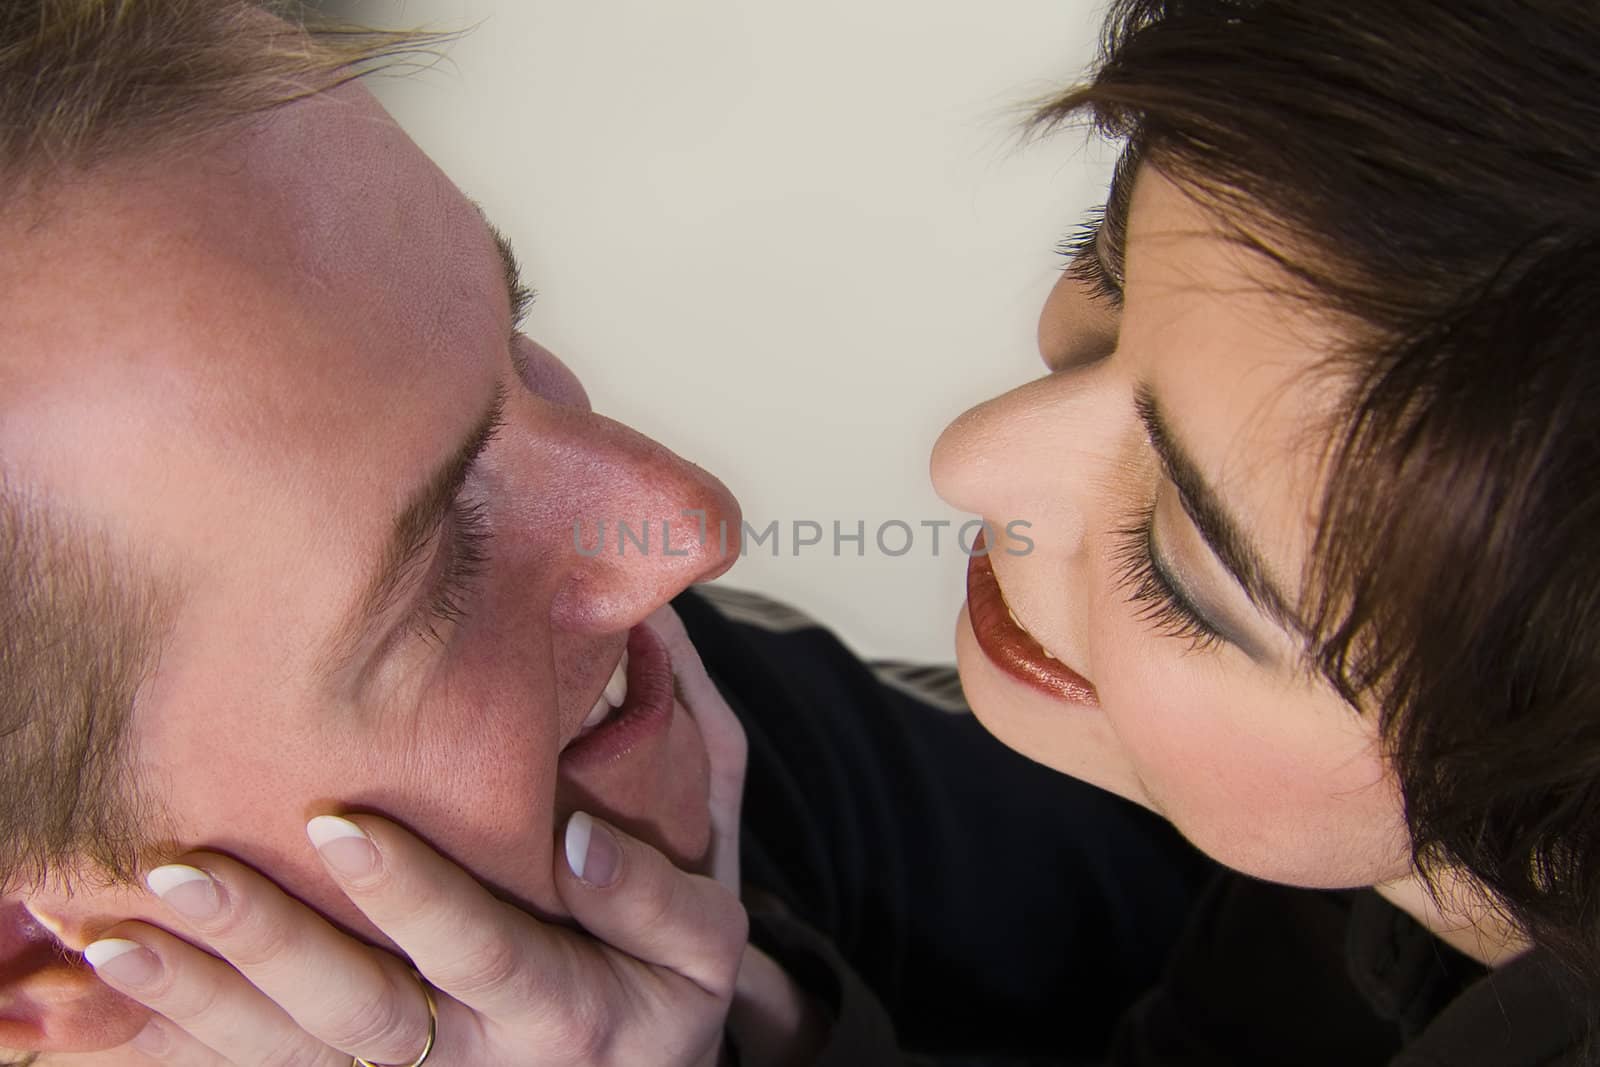 Woman stroking her man's face by DNFStyle